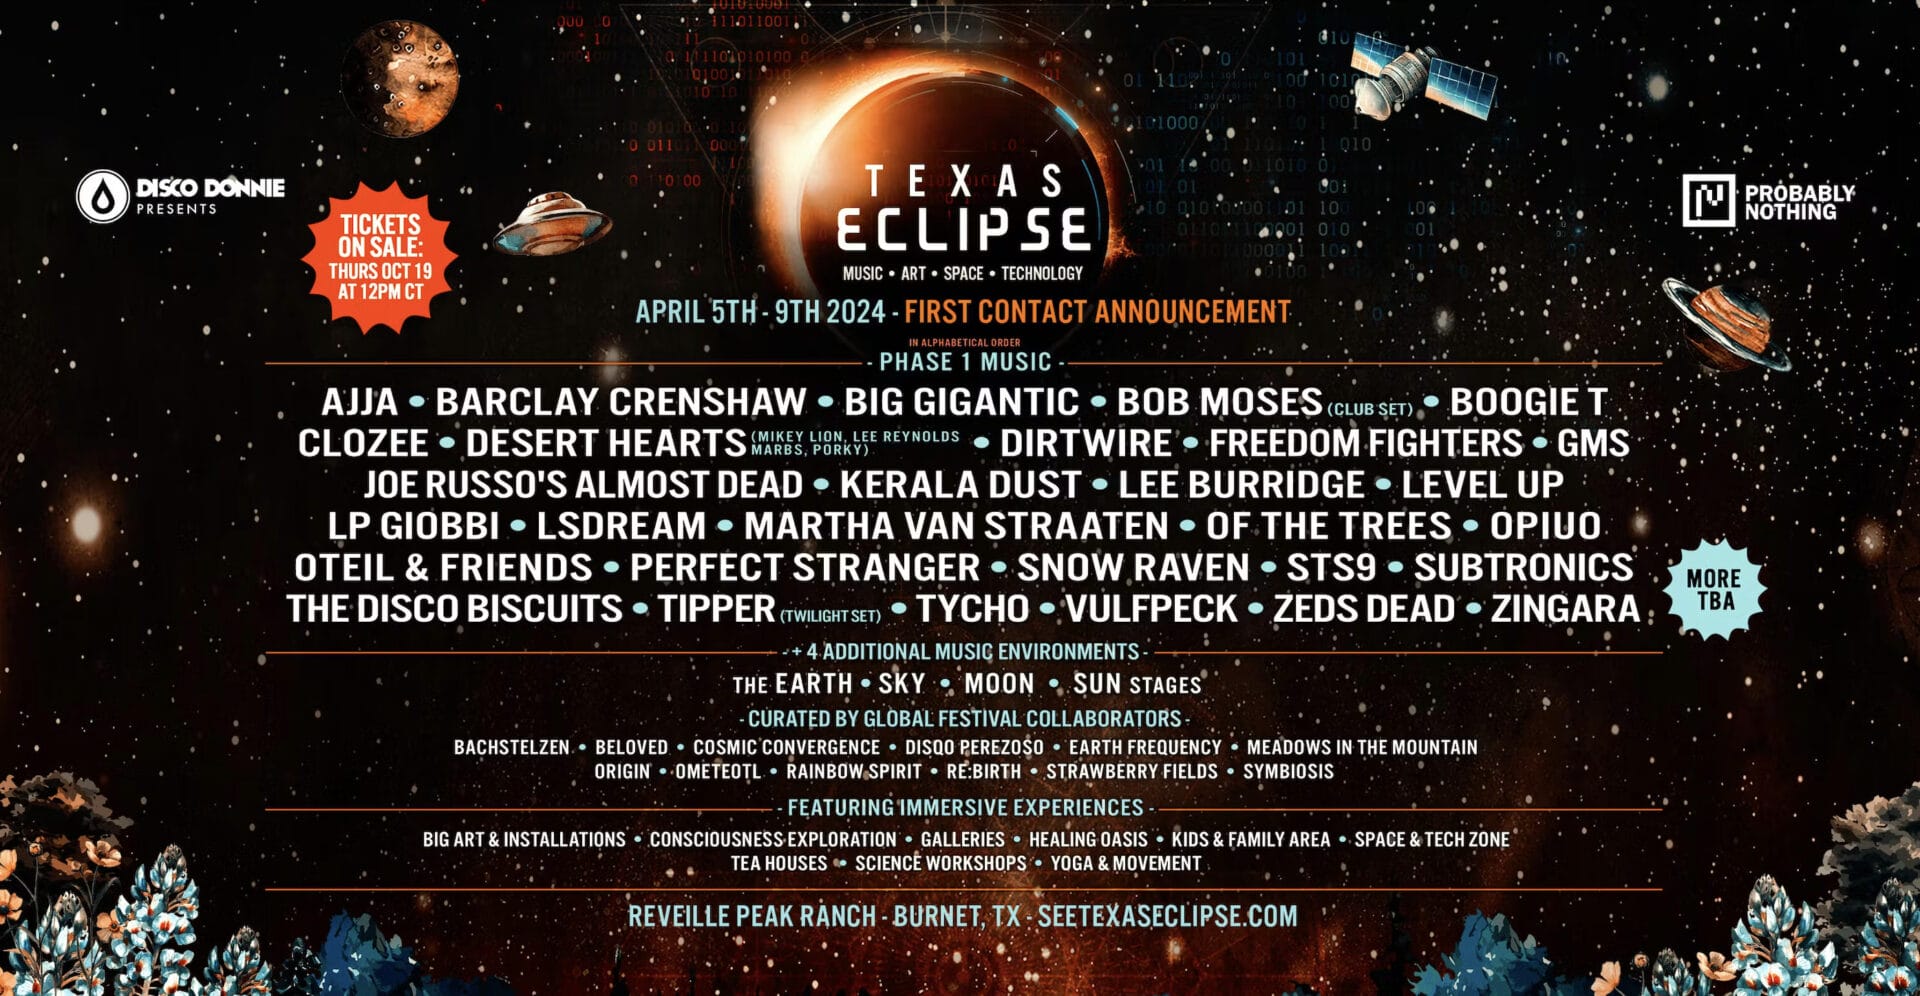 Texas Eclipse 2024 Shines a Light on First Round of Programming: Joe Russo’s Almost Dead, Vulfpeck, Tipper, Oteil & Friends and More